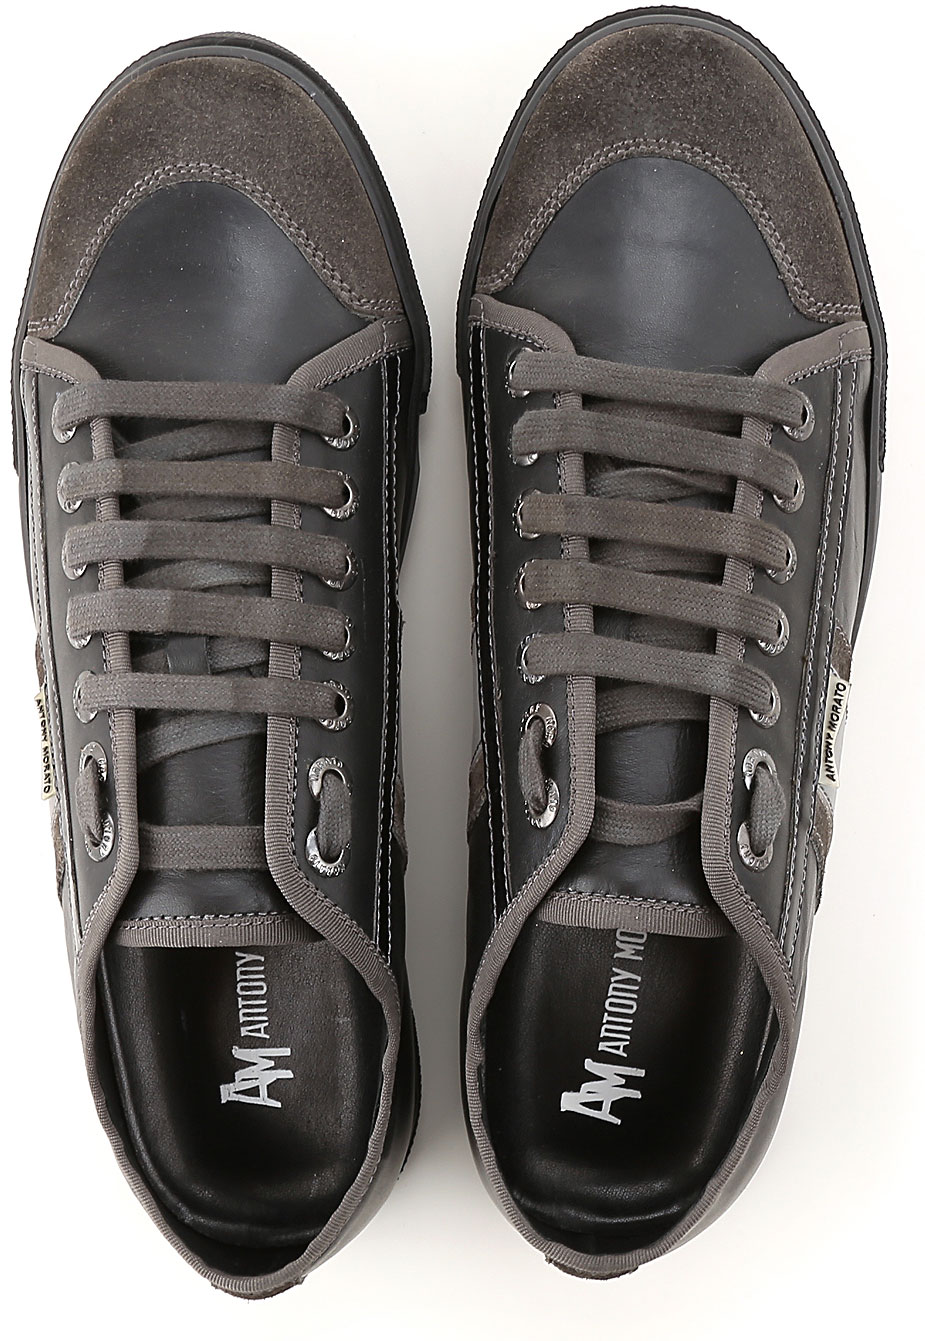 Mens Shoes Antony Morato, Style code: mmfw00002-af020001-9000